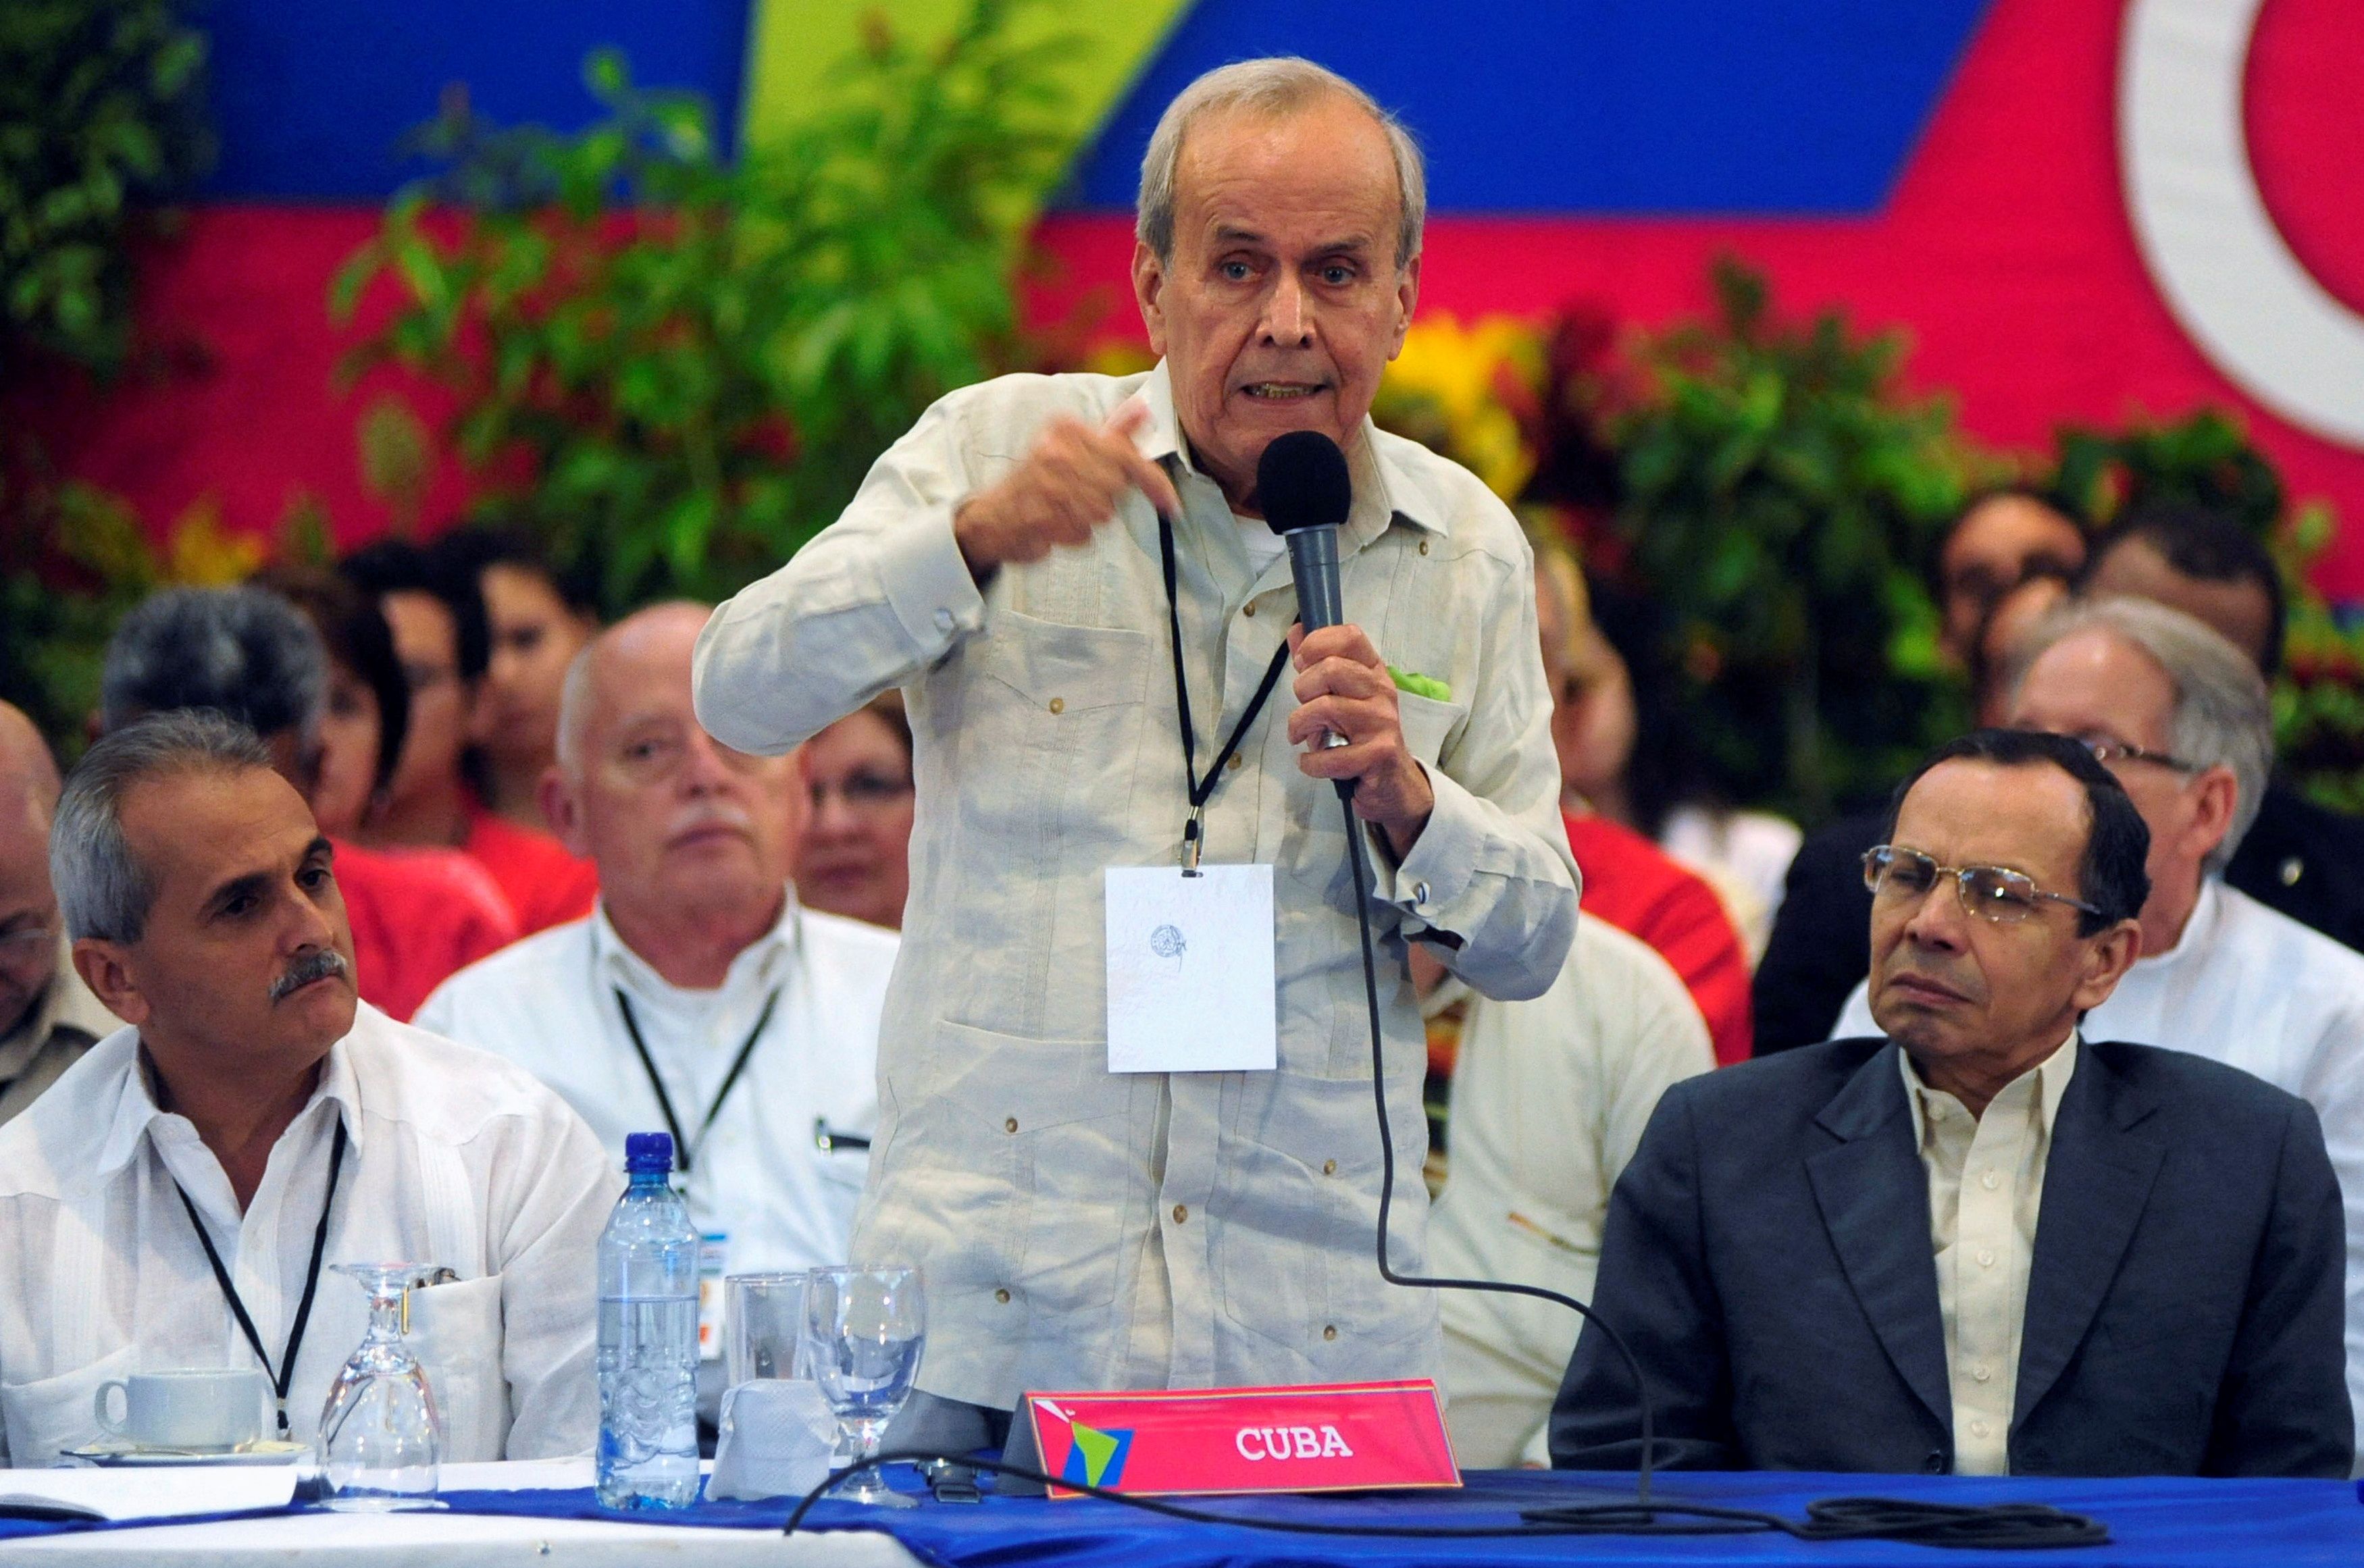 President of Cuba's National Assembly Ricardo Alarcon addresses the audience during the inauguration of the Foro de Sao Paulo (Sao Paulo meeting) in Managua